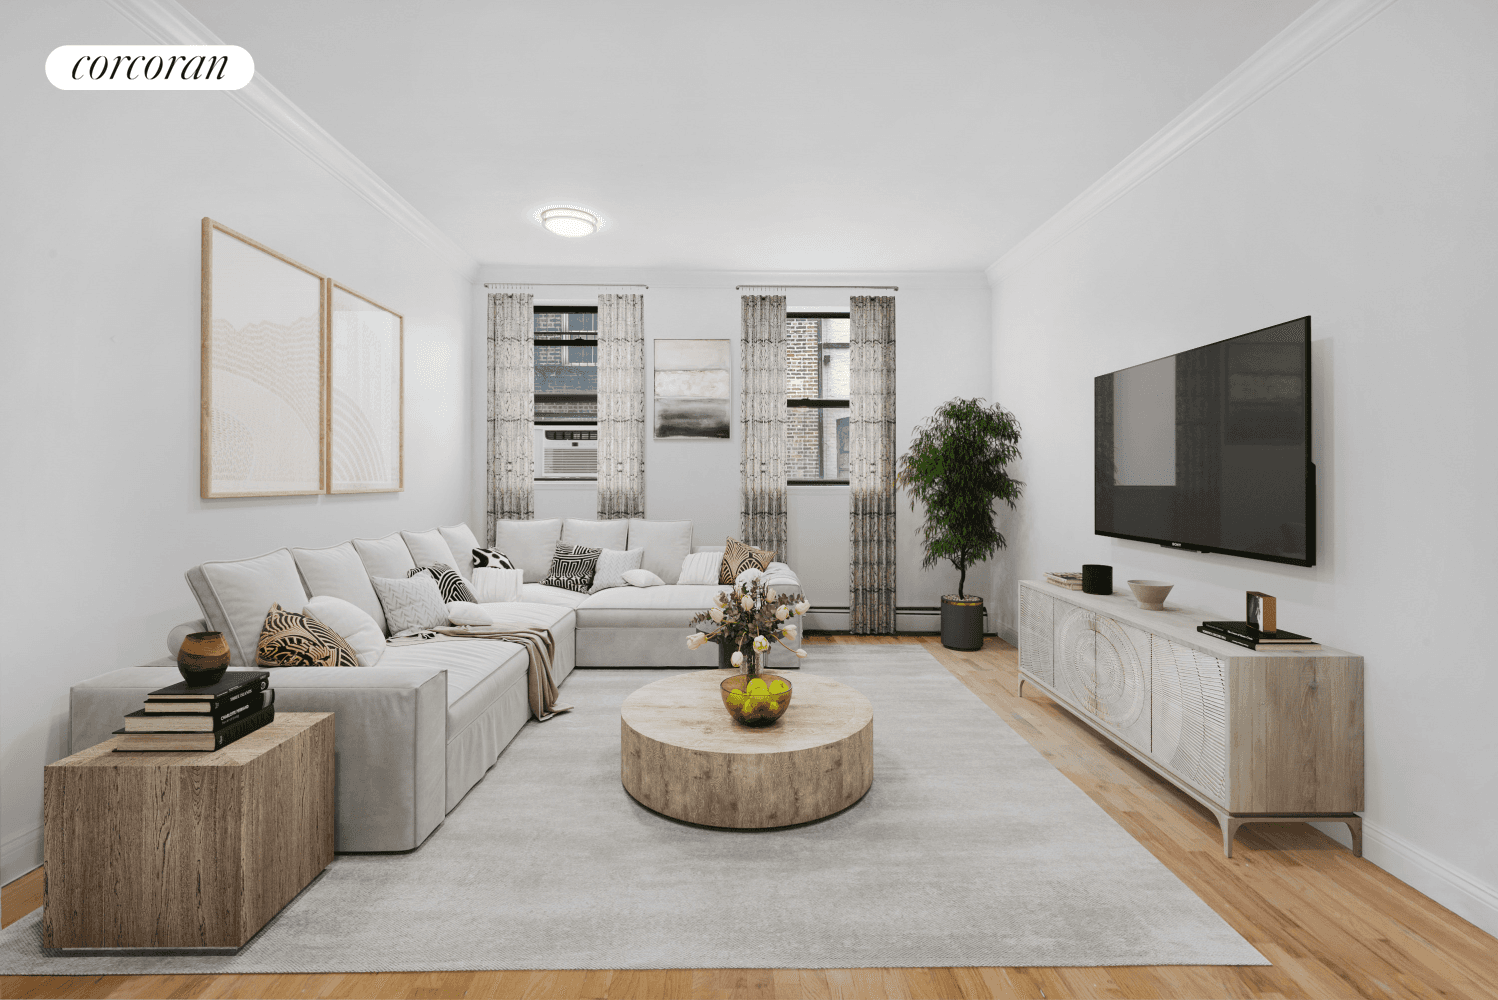 Get ready to fall head over heels for an incredible East Harlem condo nestled in the heart of Manhattan's up and coming East Harlem neighborhood.